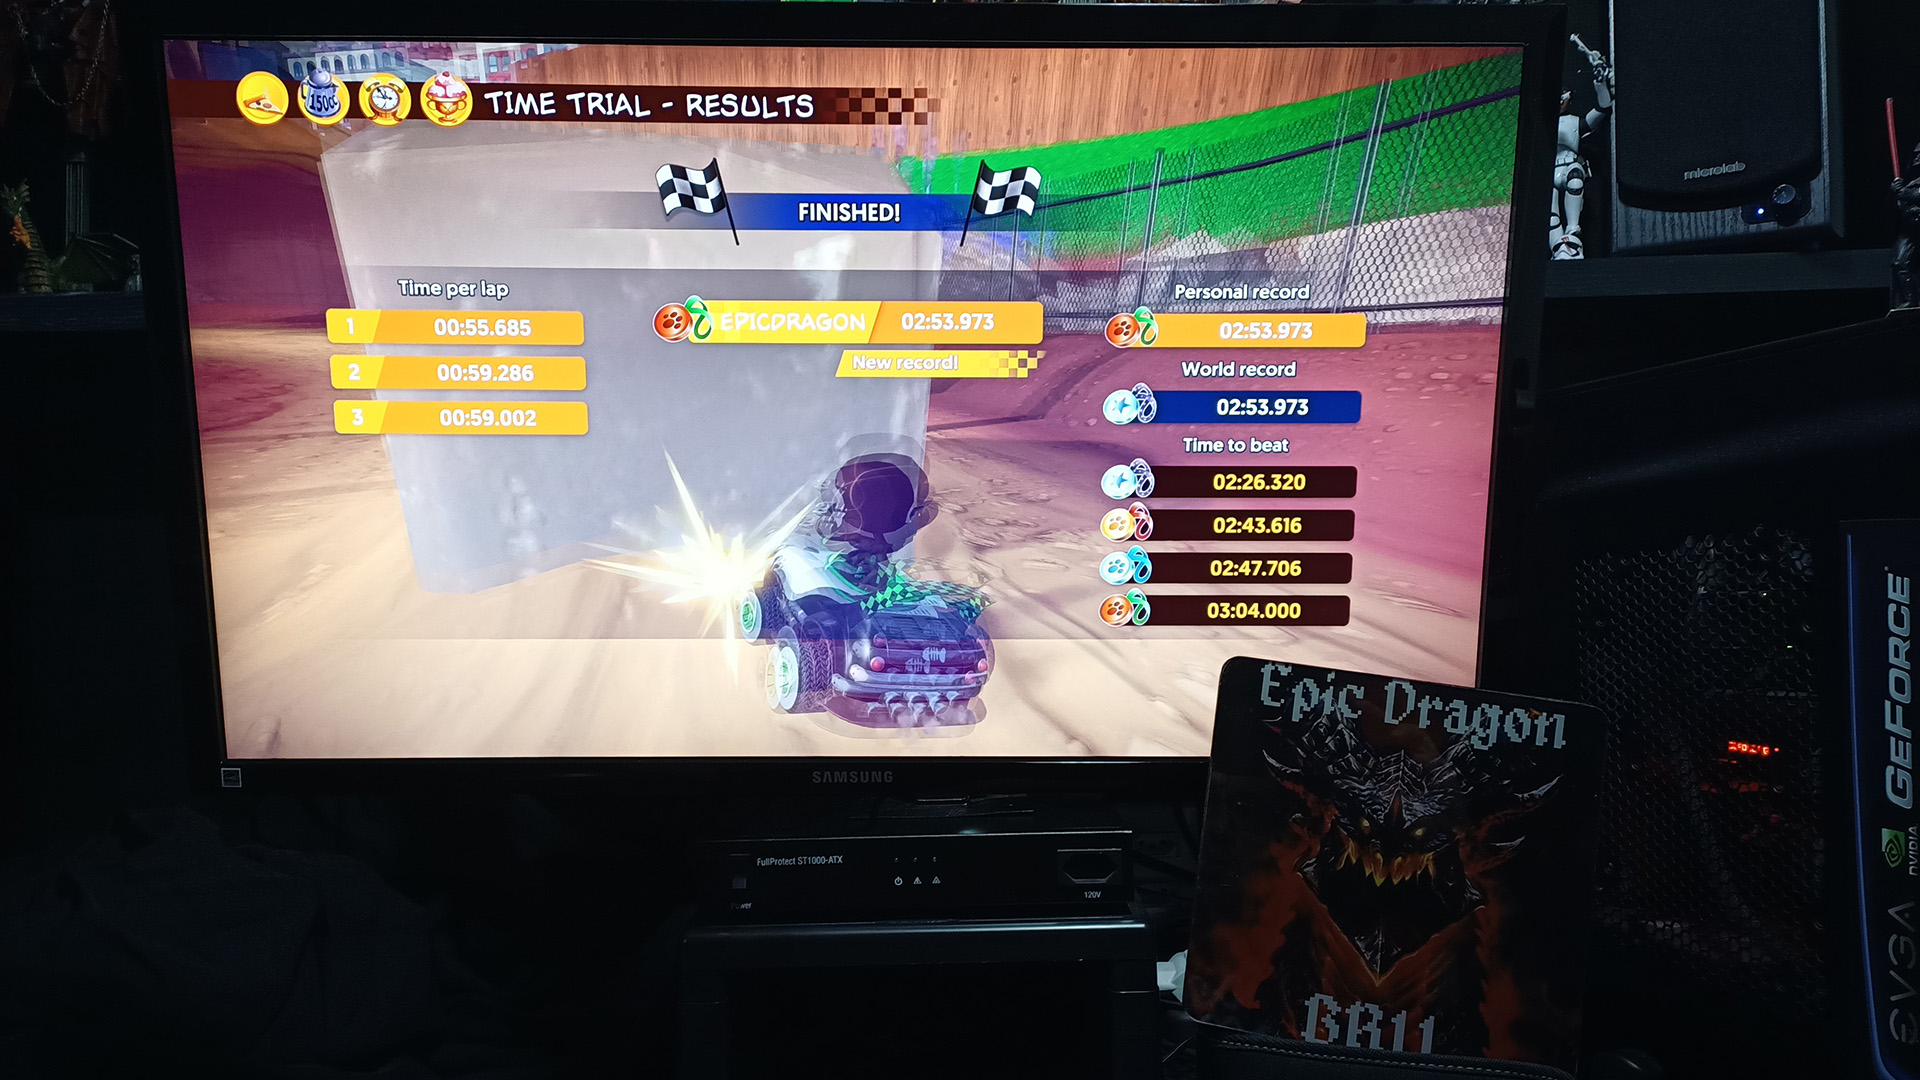 EpicDragon: Garfield Kart Furious Racing: Prohibited Site [Time Trial: Lap Time] (PC) 0:00:55.685 points on 2022-08-14 15:00:19